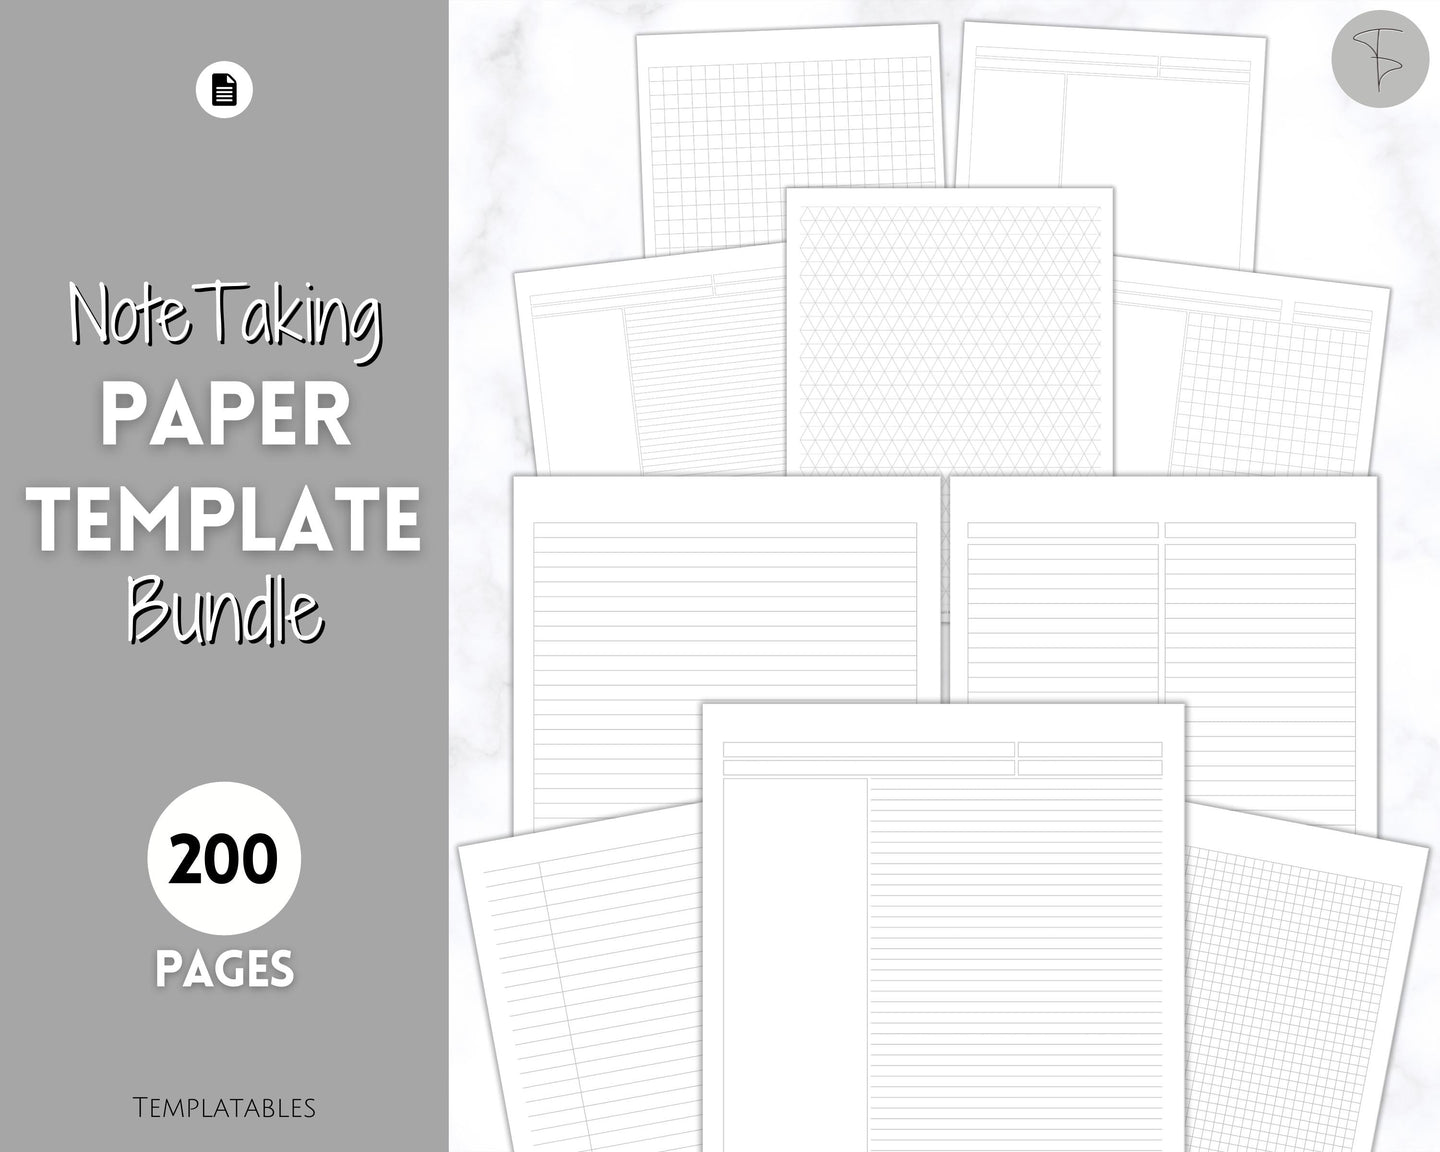 Note Taking Templates, Printable Paper, Note Taking Journal, Cornell Notes, Dot Lined Grid, Graph, Meeting Notebook, Student Digital Note-taking